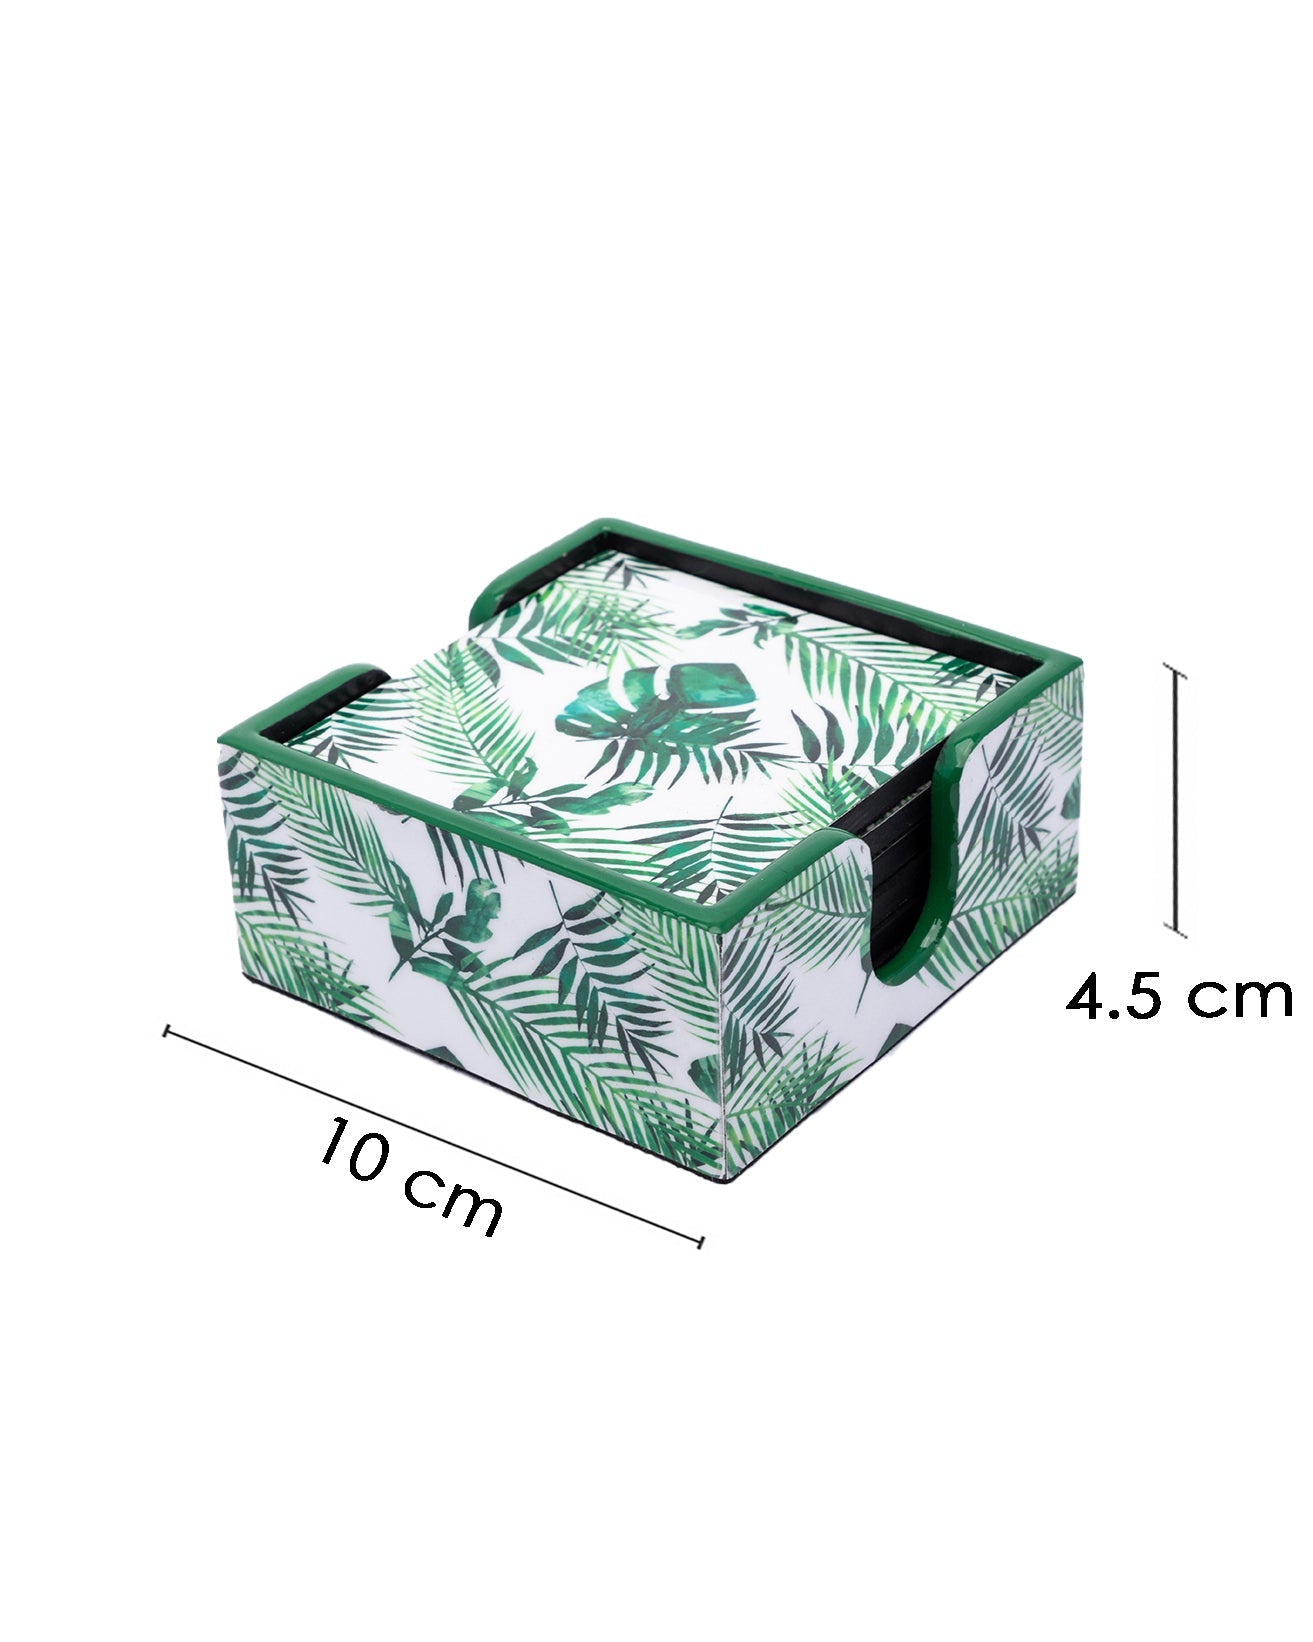 VON CASA Coaster with Holder, Nature Inspired Print, Tea Coaster, with Soft Bottom for Home, Office, & Restaurant, Green Colour, MDF, Set of 6